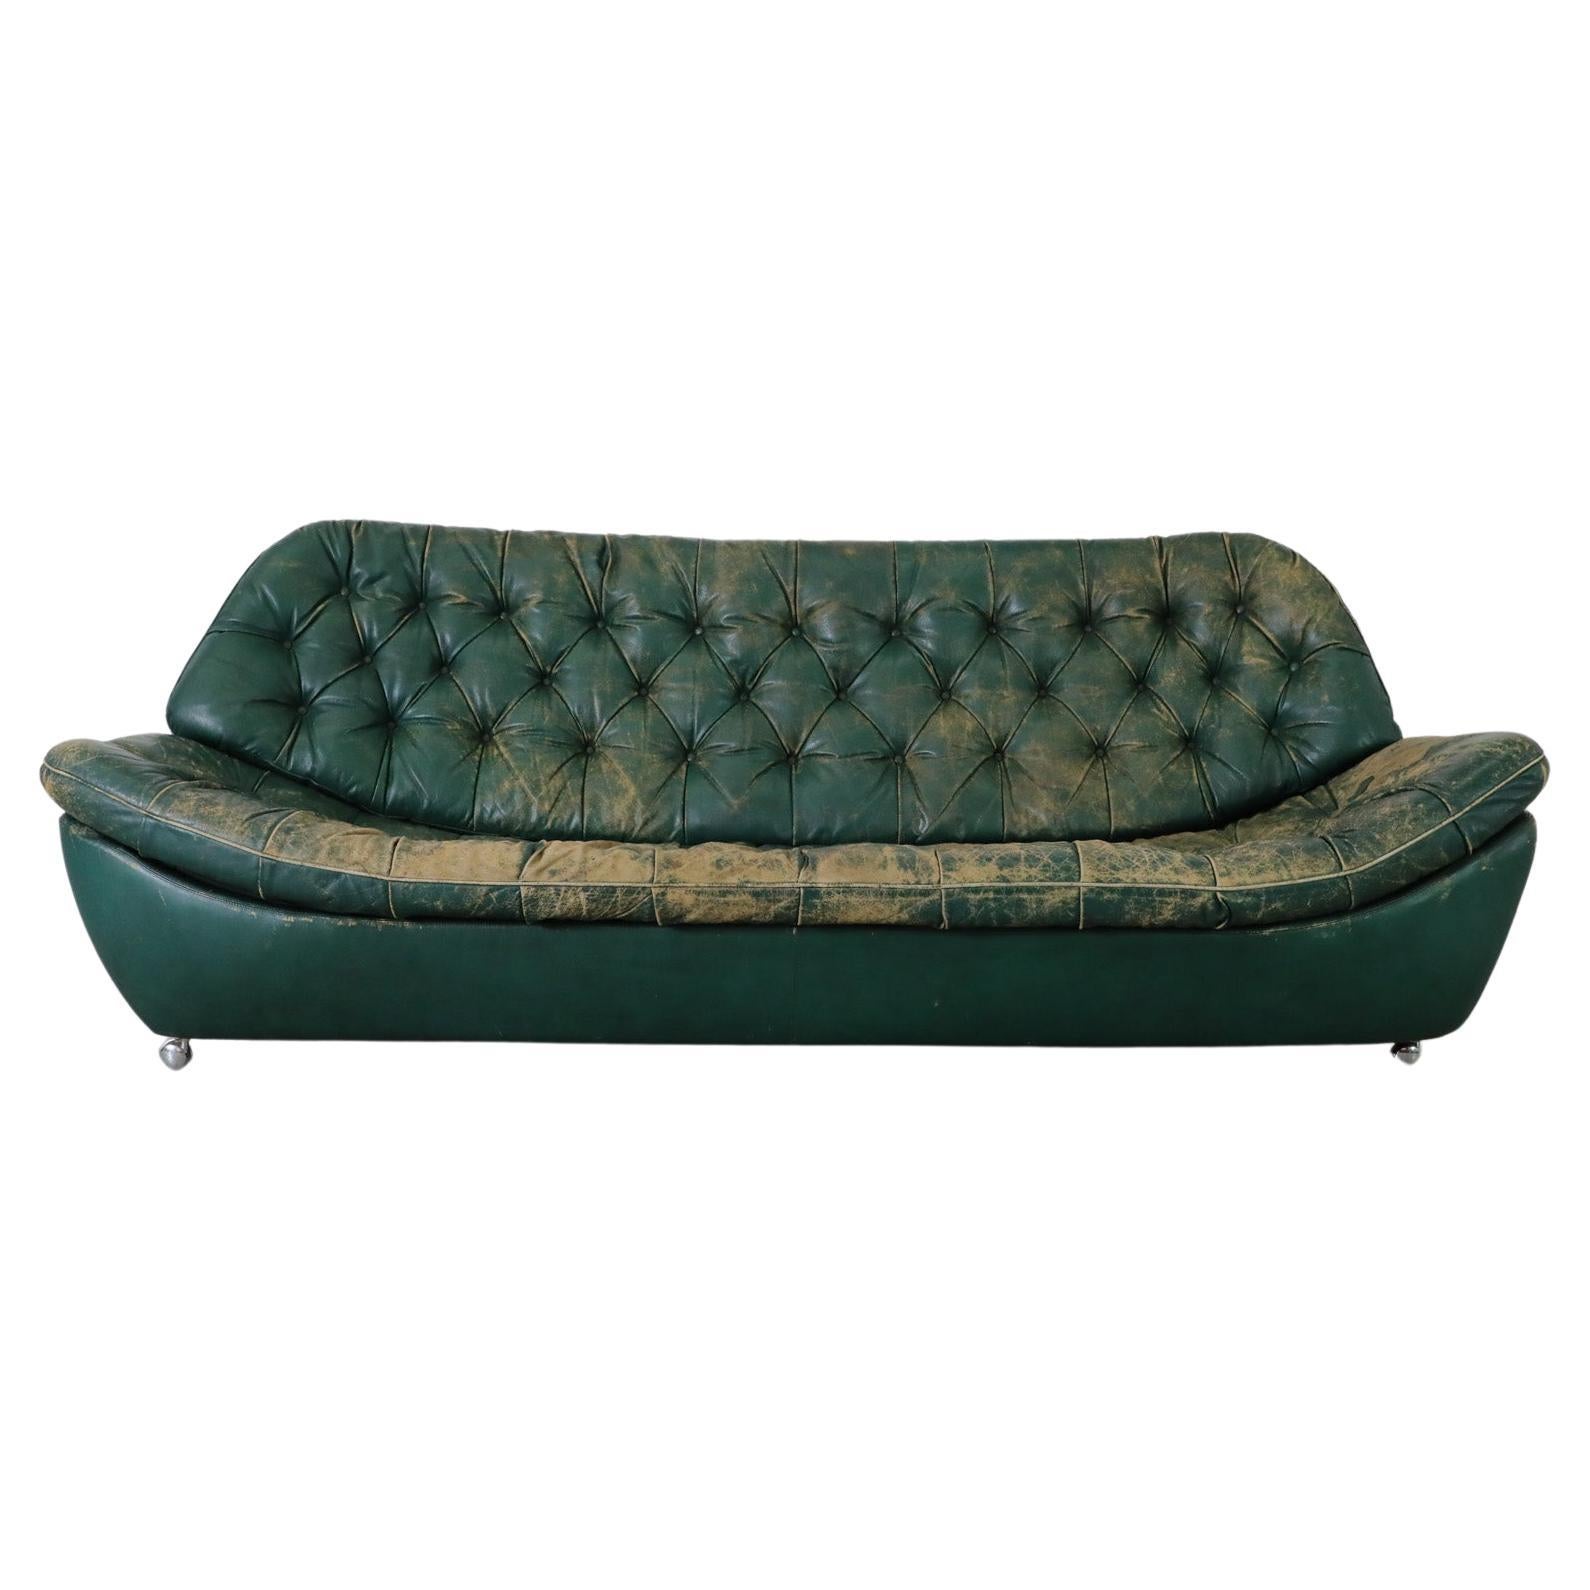 German Chesterfield Style Mid-Century Green Leather Tufted Sofa on Front Wheels For Sale